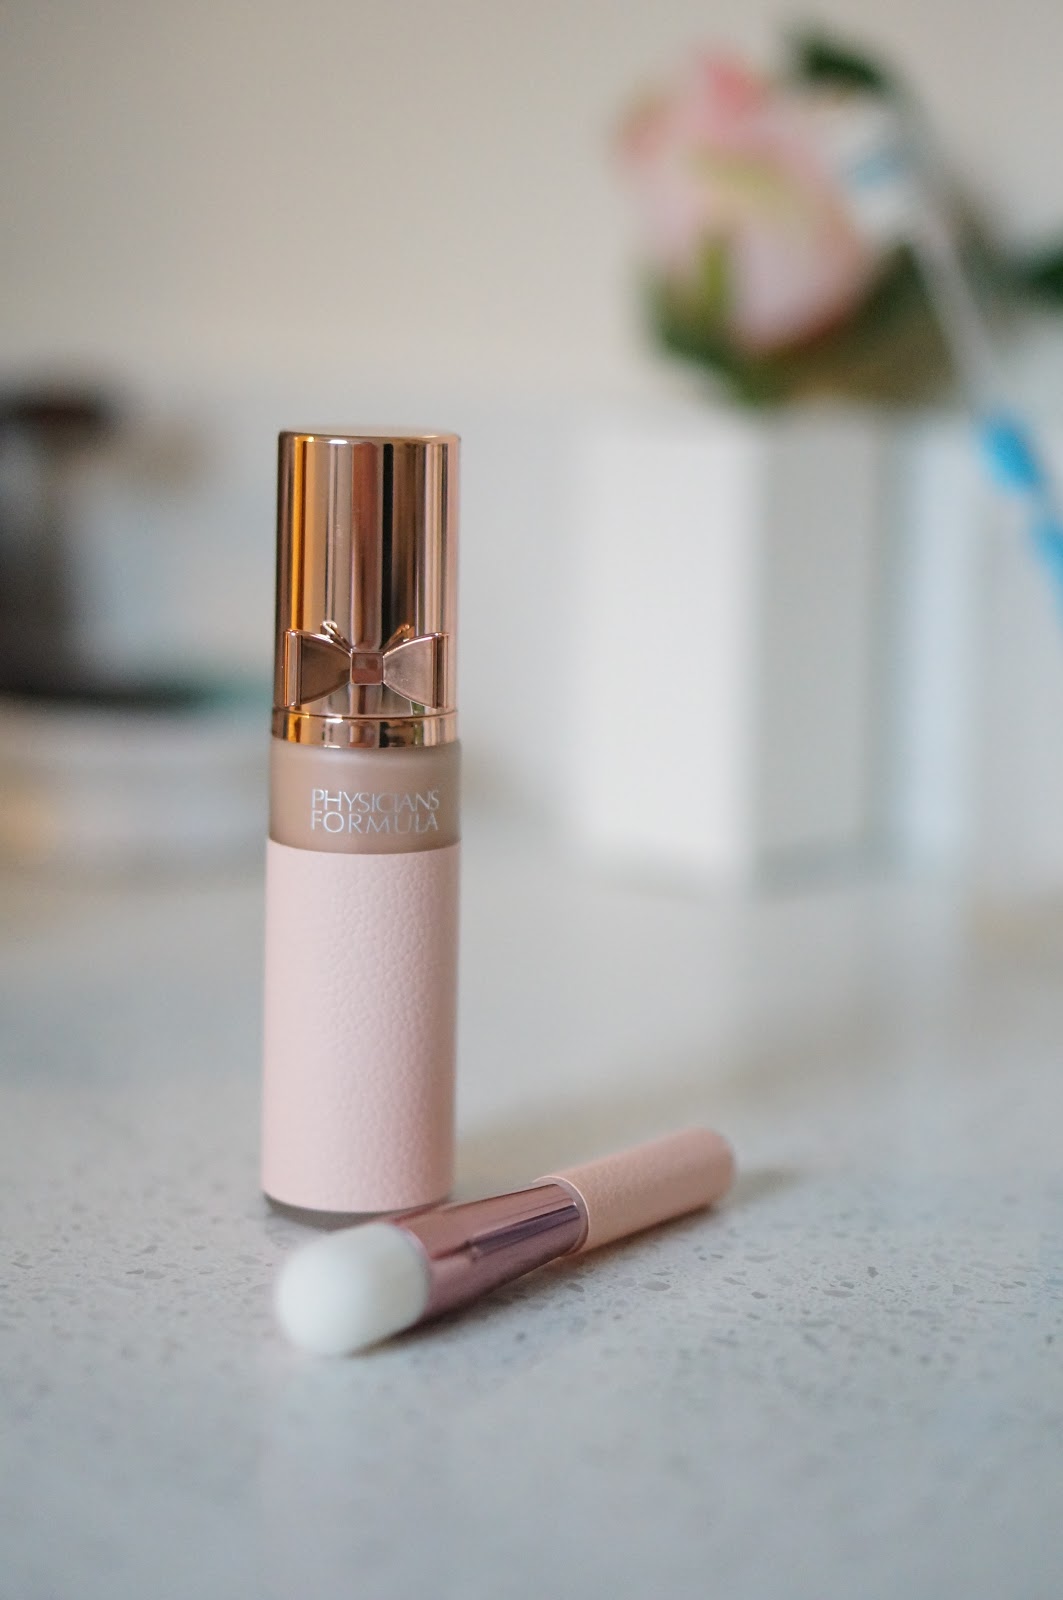 Popular North Carolina style blogger Rebecca Lately tries the Physicians Formula Tough of Glow Foundation.  Click here to read her review!